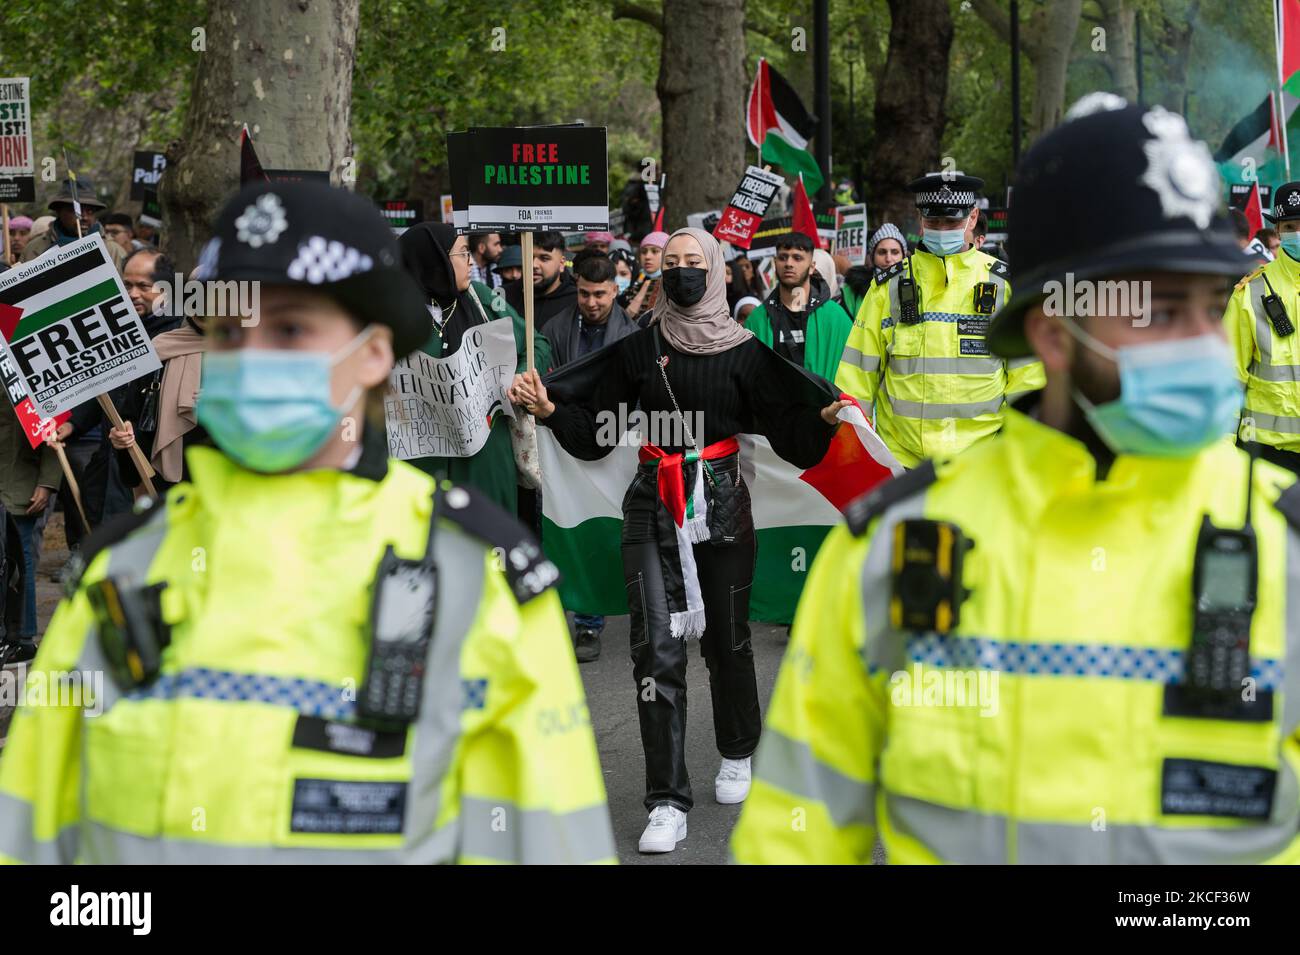 LONDON, UNITED KINGDOM - MAY 22, 2021: Tens of thousands of protesters gather in central London for a demonstration in support of Palestine, on 22 May, 2021 in London, England. A ceasefire between Israel and Palestine came into force on Friday following 11 days of air strikes that left more than 250 dead as conflict escalated over planned evictions of Palestinian families from their homes by Jewish settlers in the Sheikh Jarrah district of East Jerusalem and clashes with security forces around the Old City during Ramadan. (Photo by WIktor Szymanowicz/NurPhoto) Stock Photo